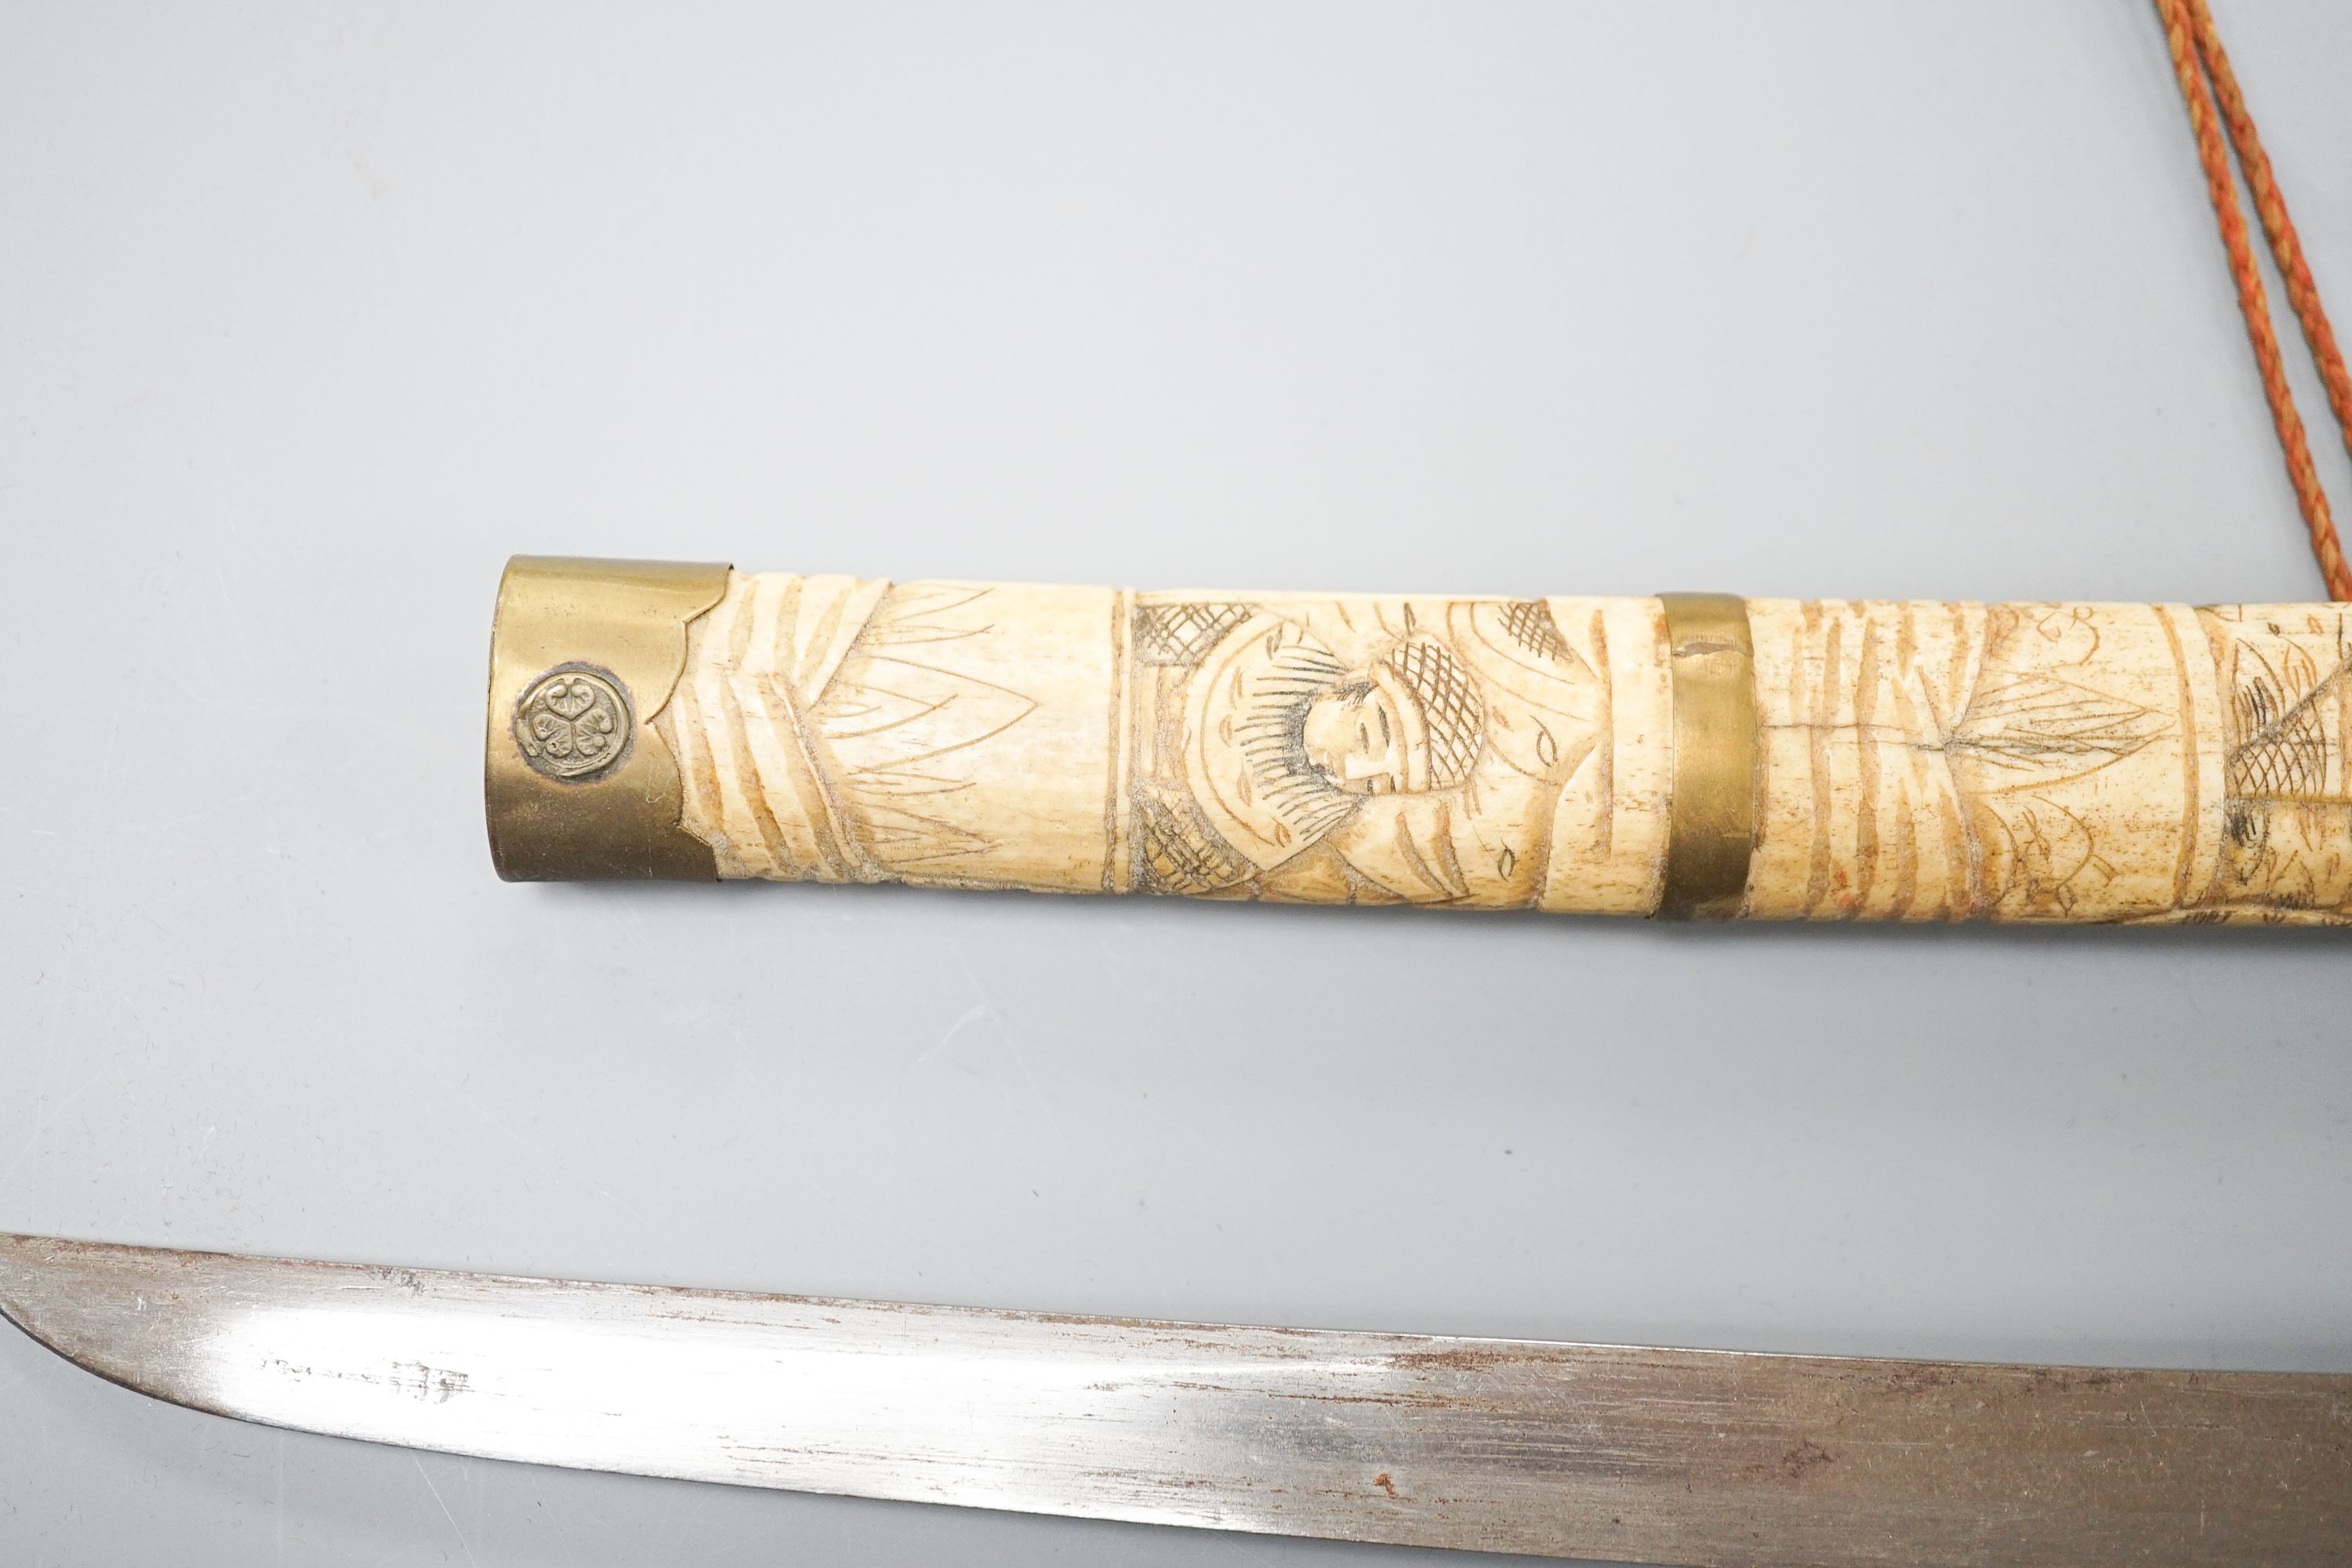 A 20th century bone and brass mounted tanto sword